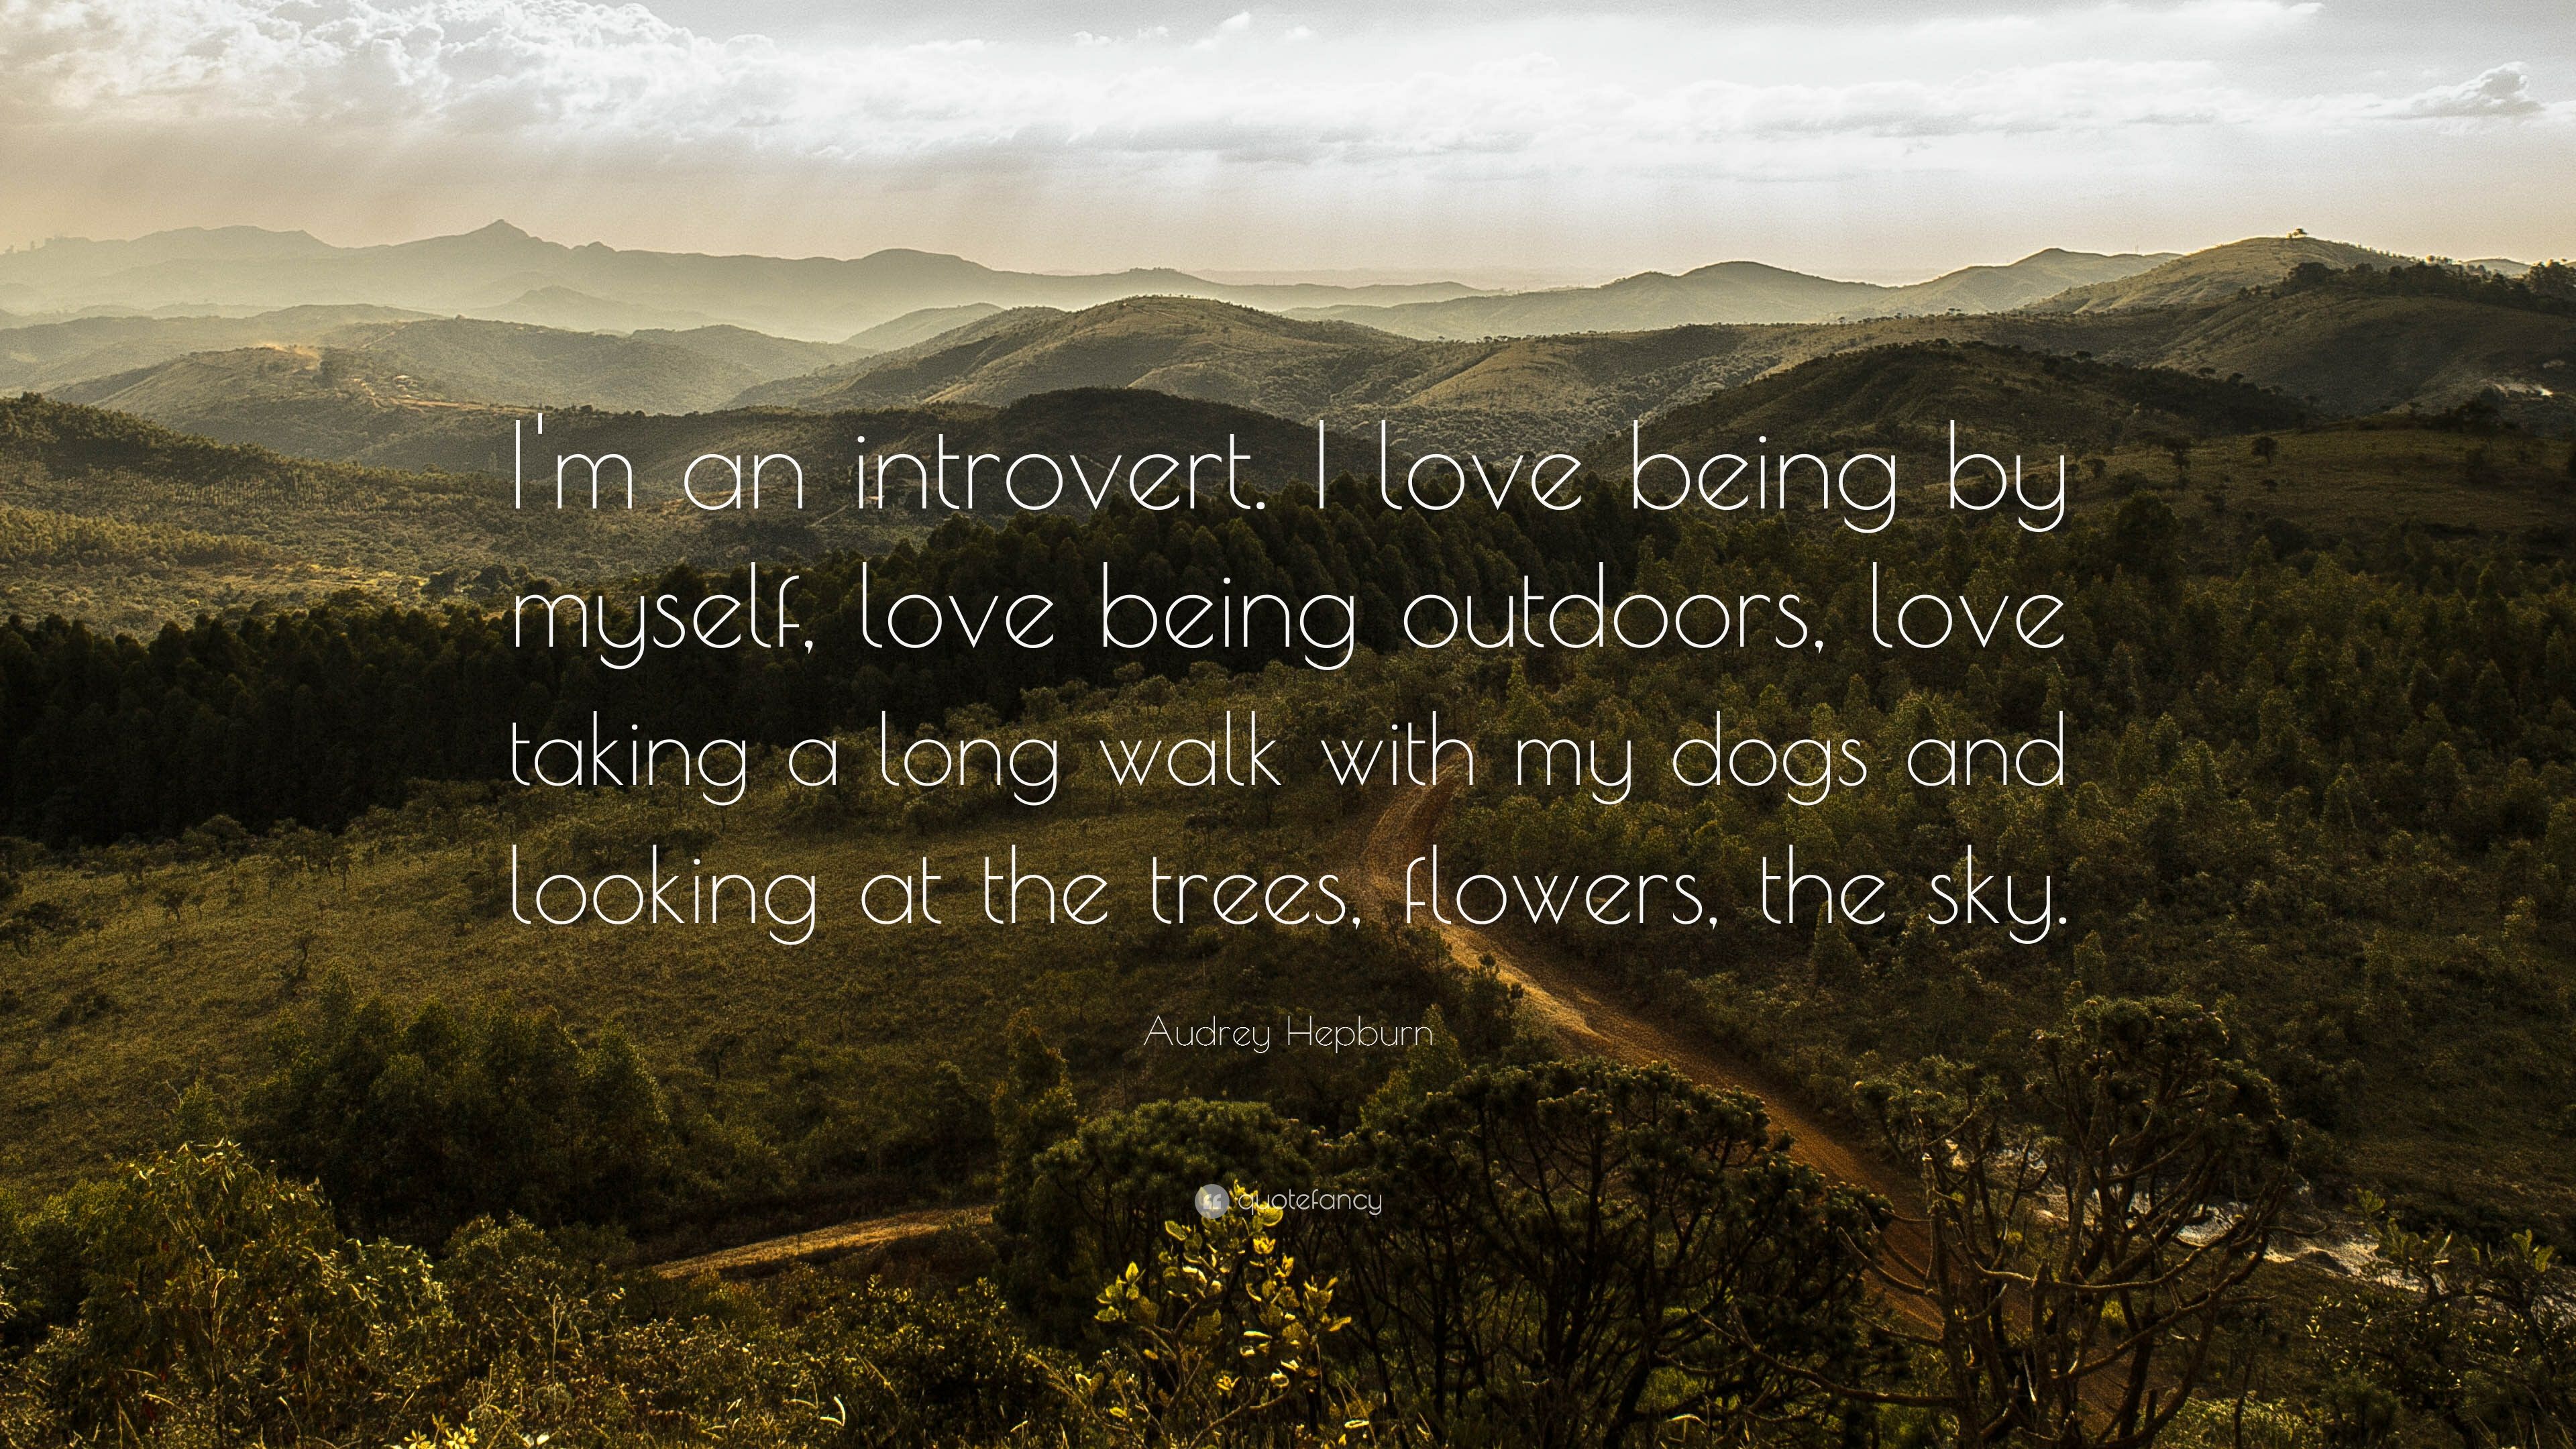 Audrey Hepburn Quote: “I'm an introvert. I love being